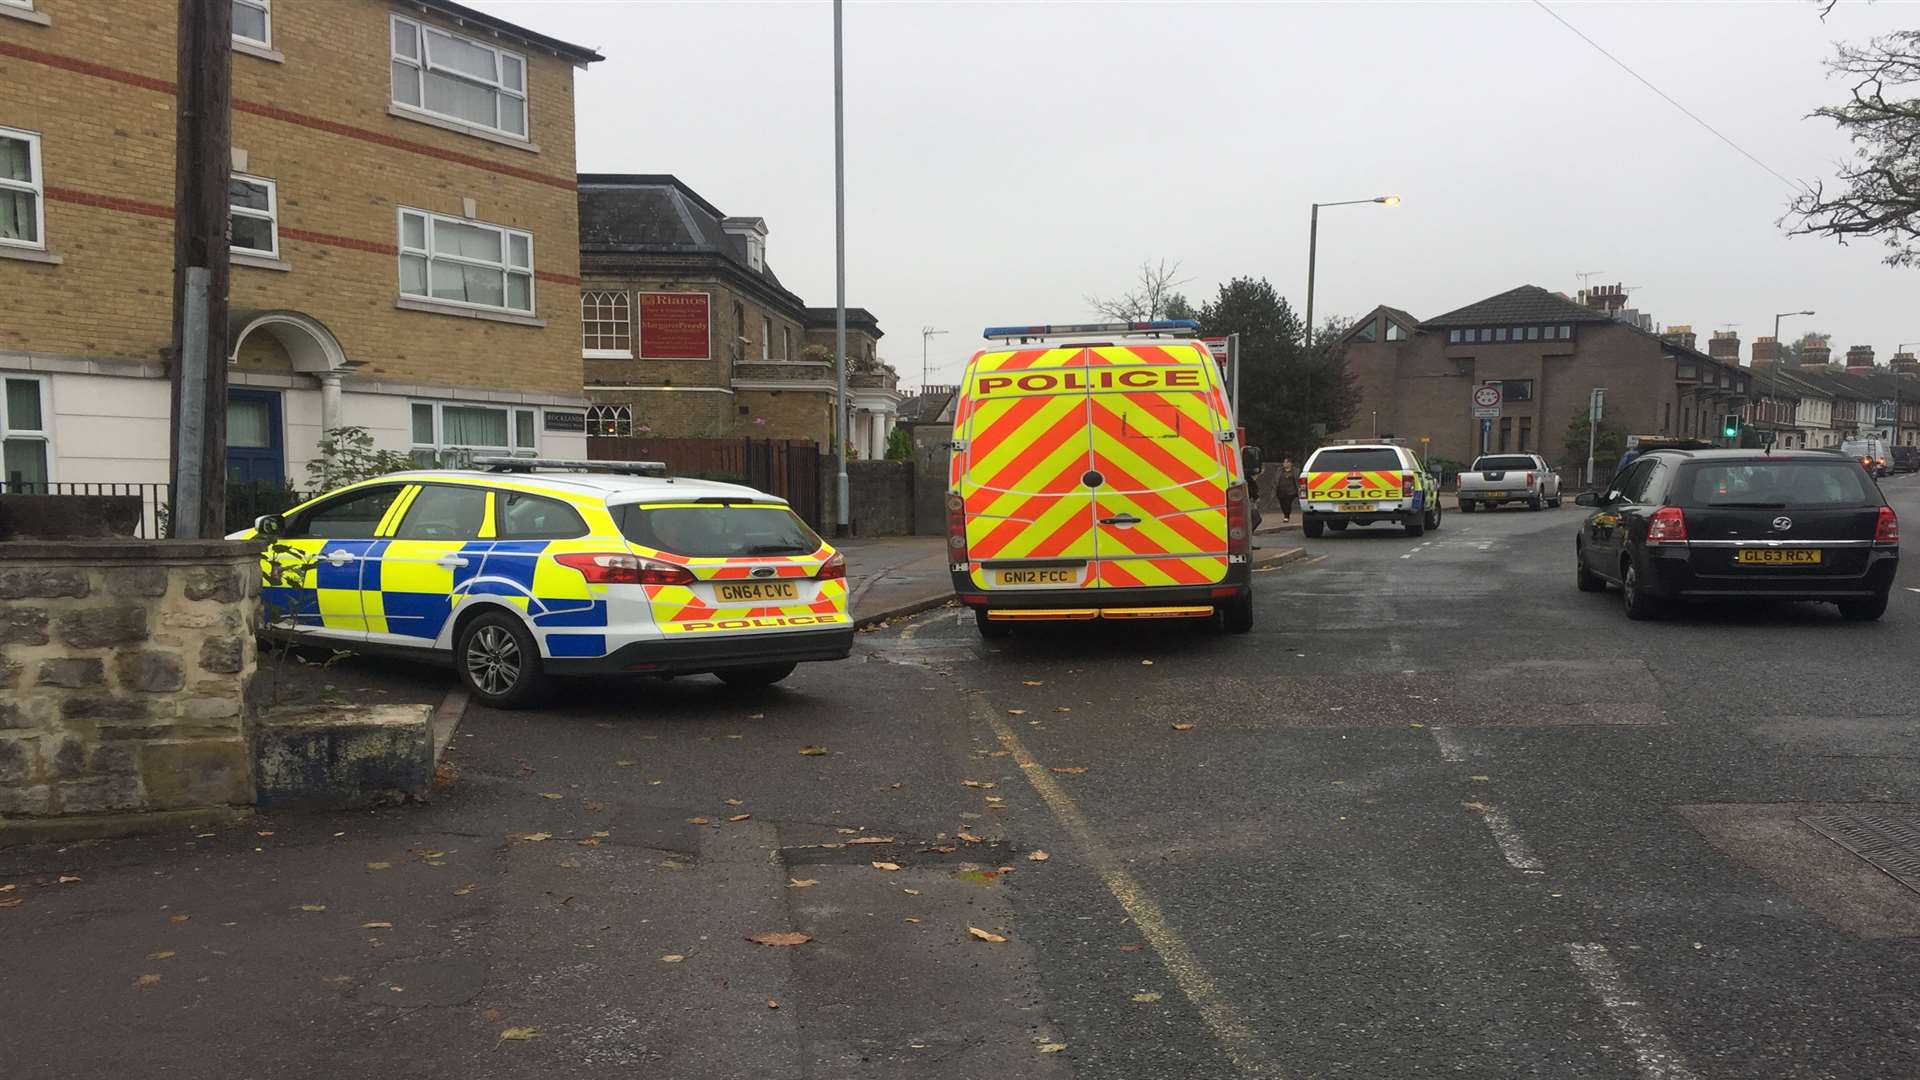 Two police cars and a van were also spotted at the scene